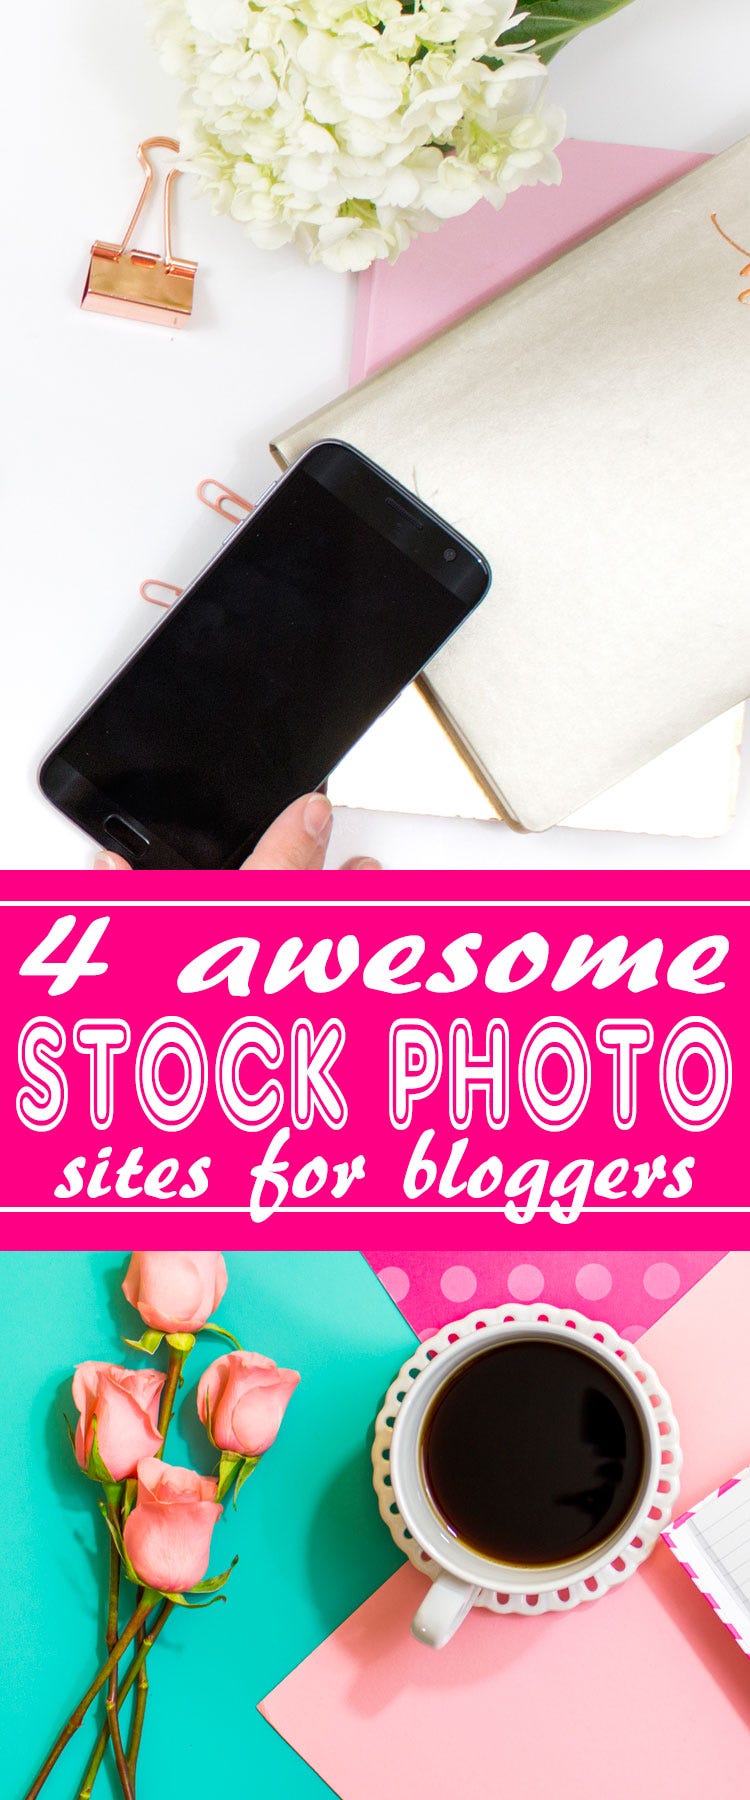 Photography is so important for blog posts. These 4 stock photography sites were created just for bloggers like you. Inexpensive packages & great photos!